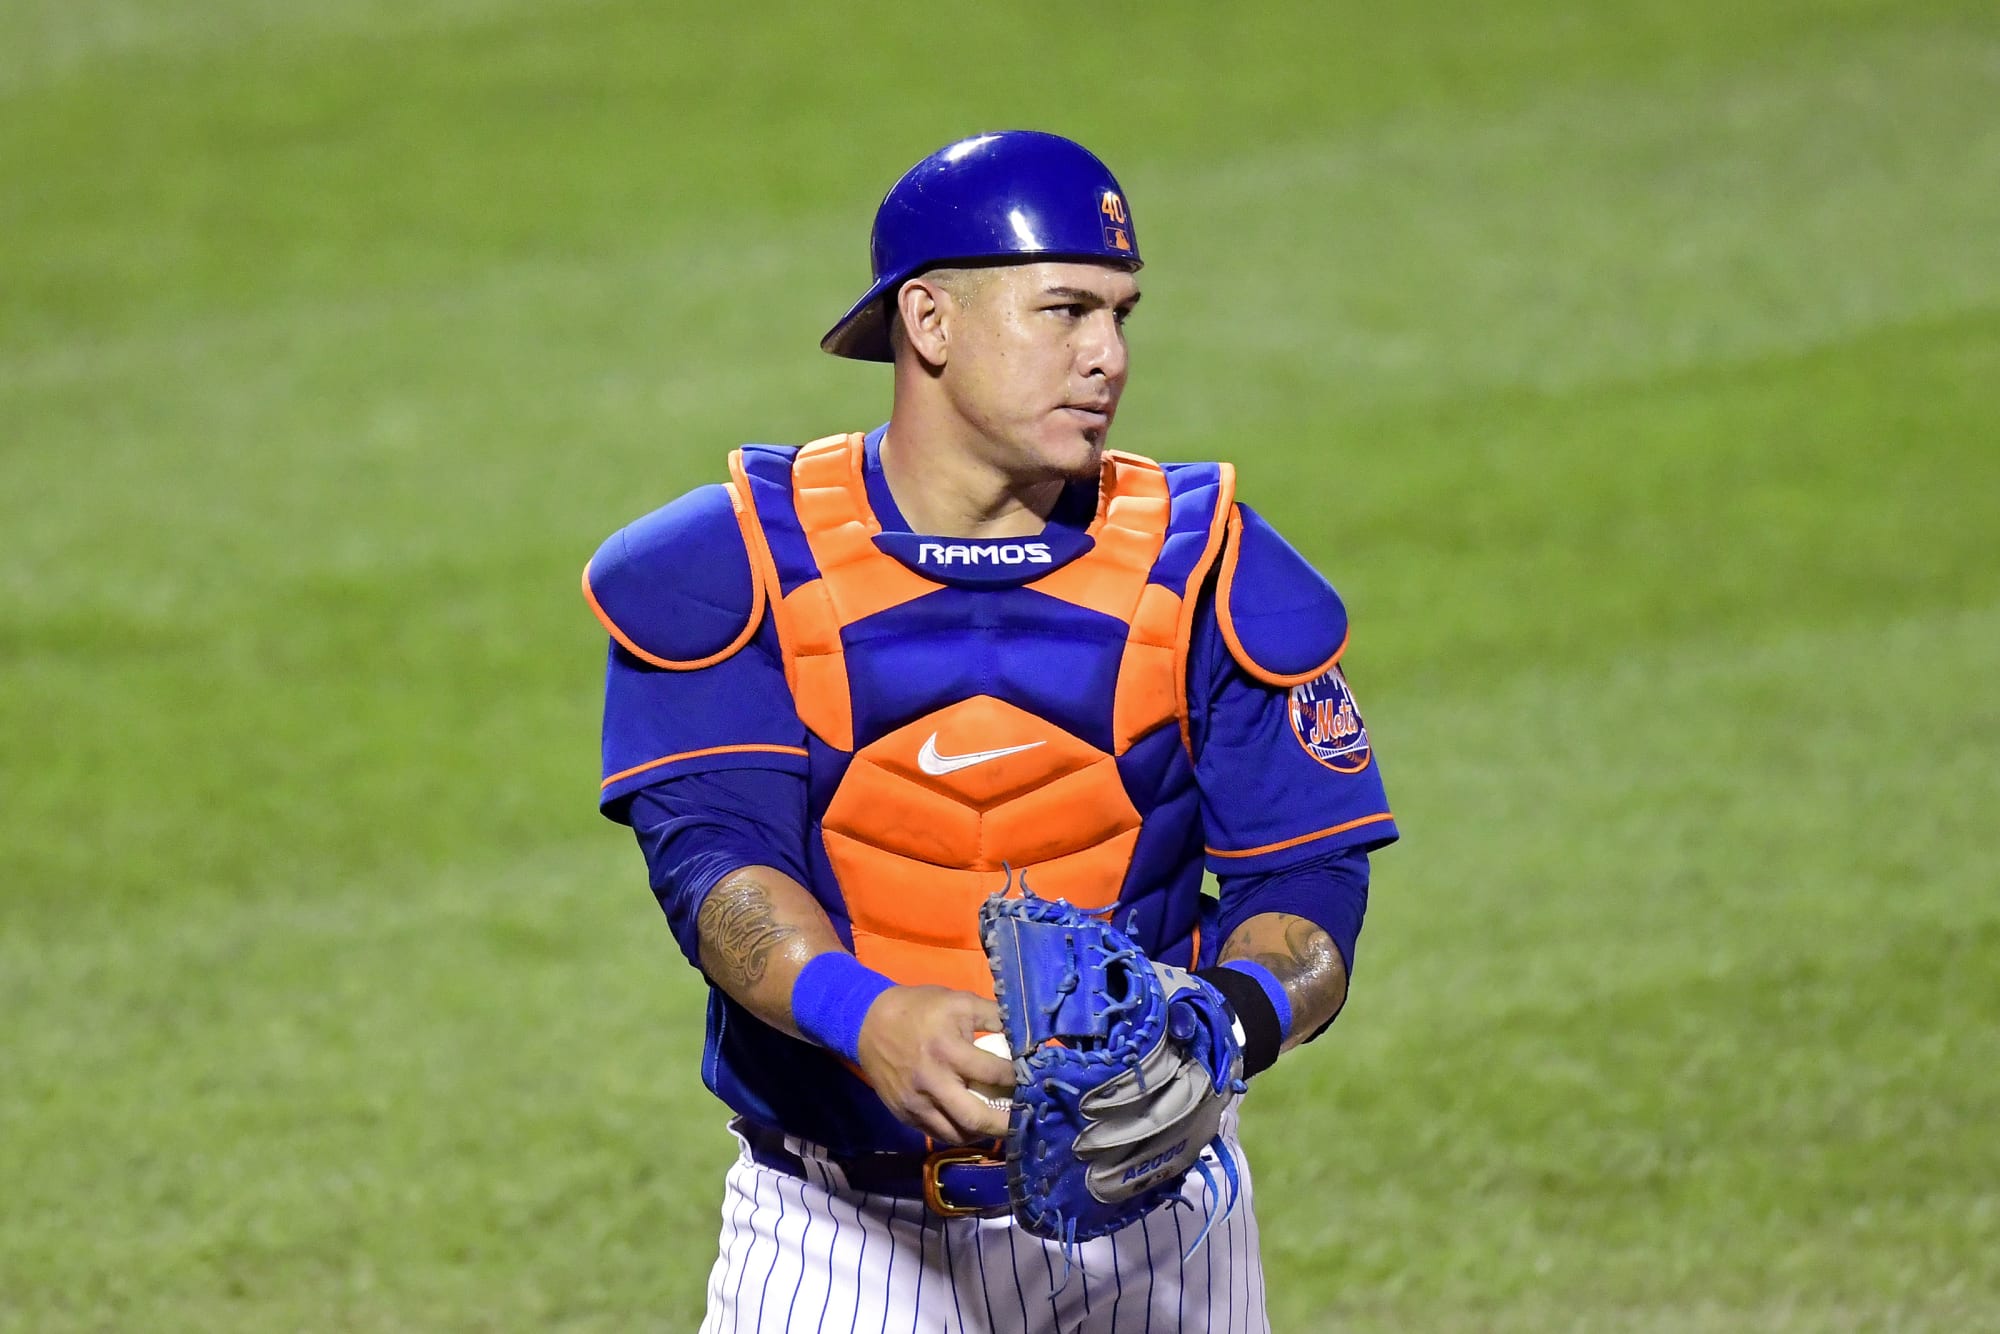 Mets catcher options to explore in free agency this winter